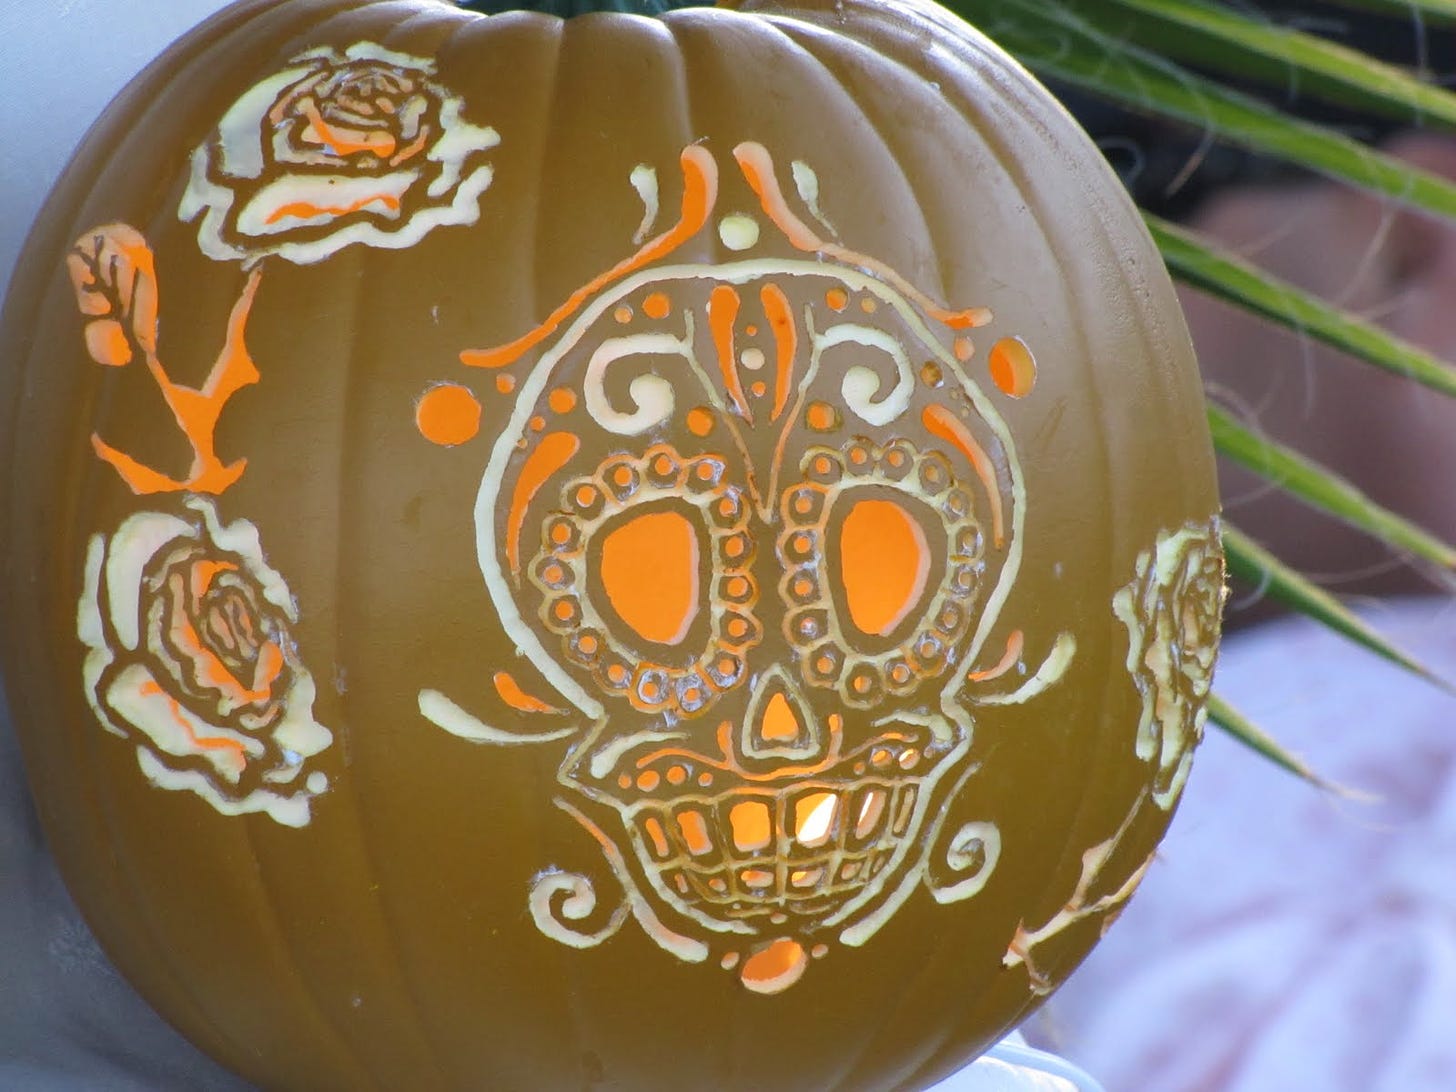 Carved pumpkin with calavera and roses